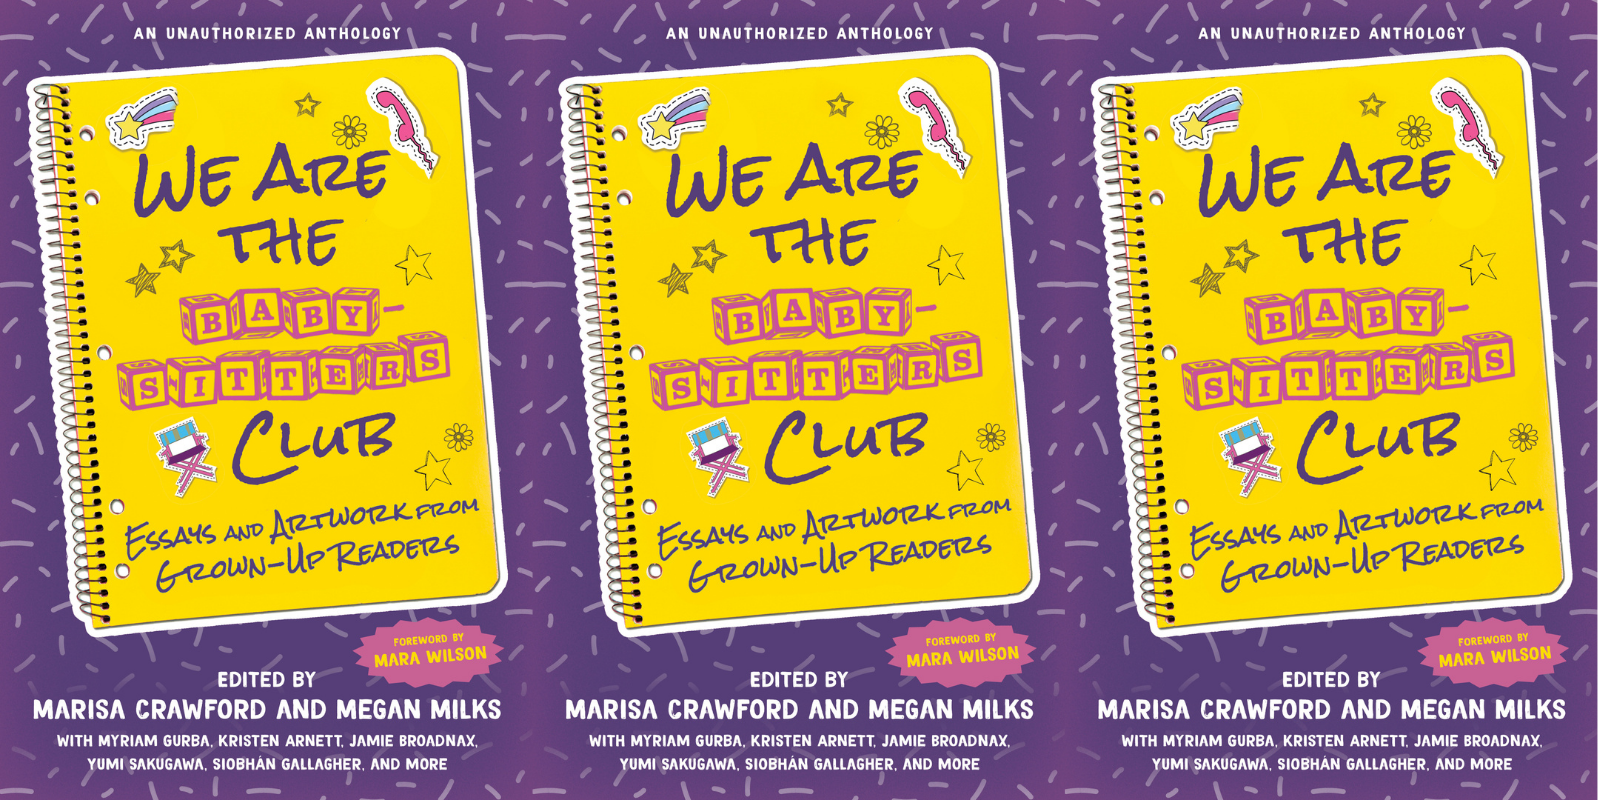 the cover of the new babysitter's club anthology repeated three times, a yellow book on a purple background